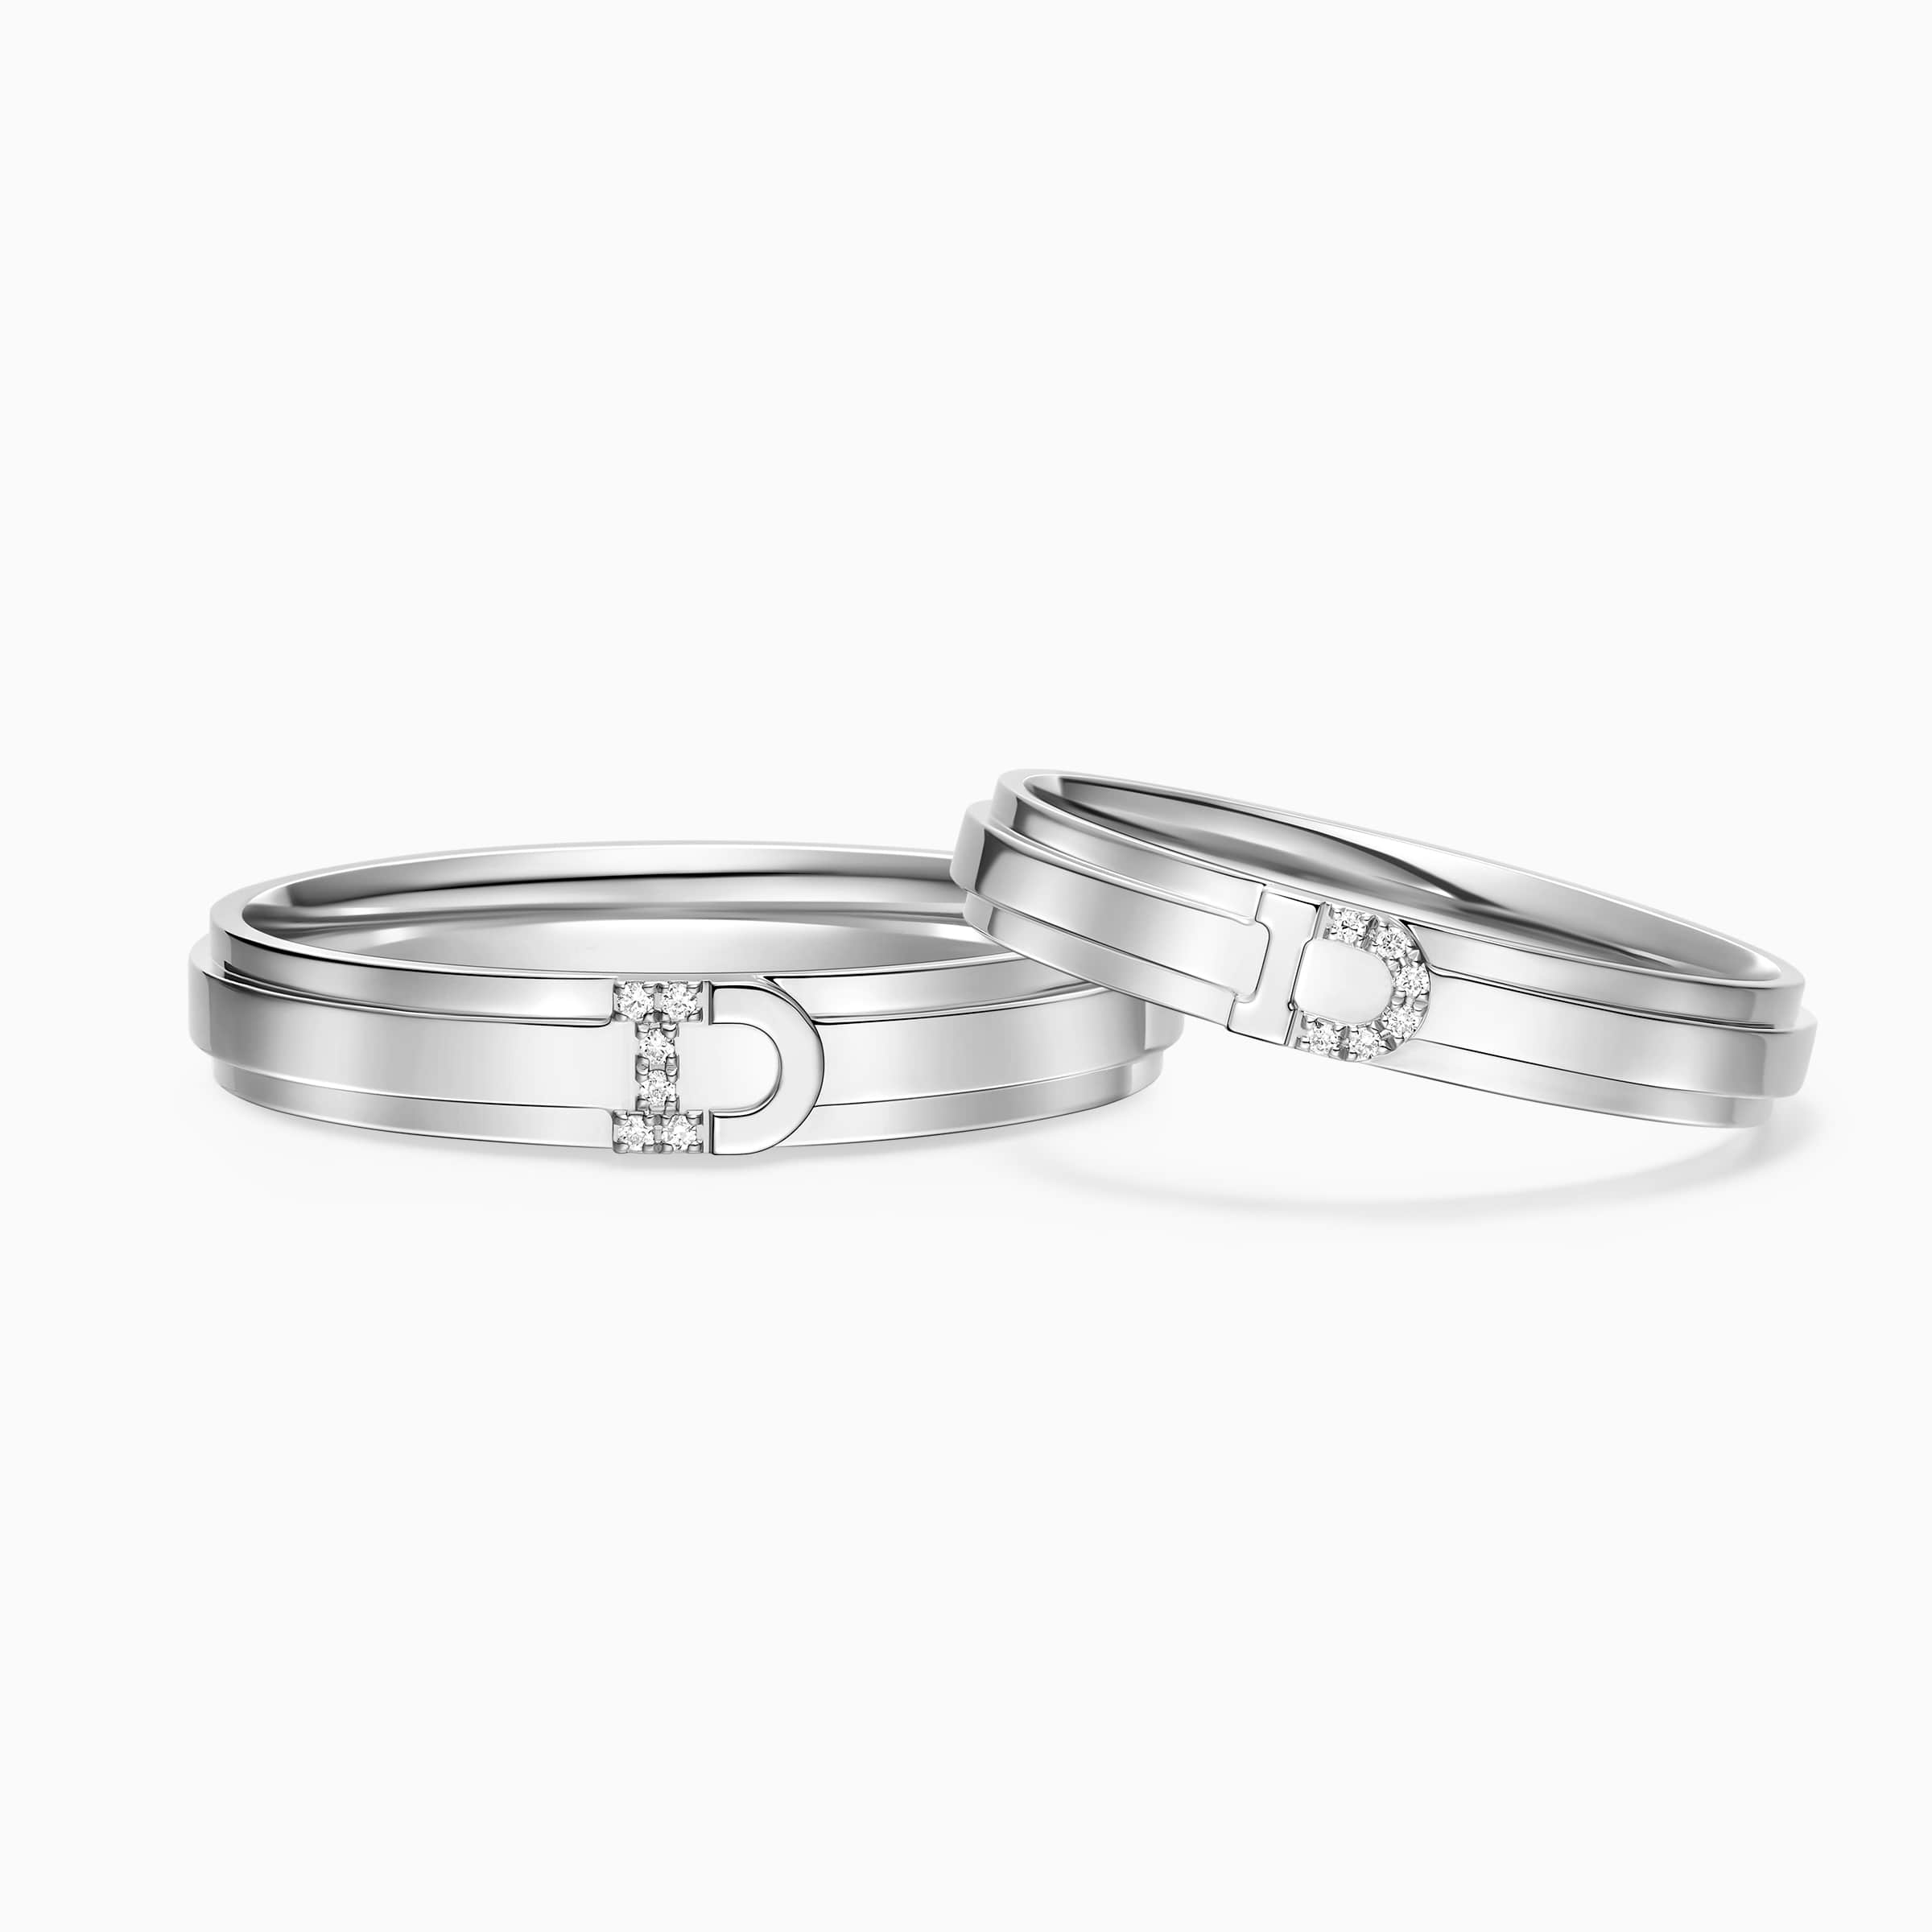 Darry Ring white gold wedding ring sets for him and her